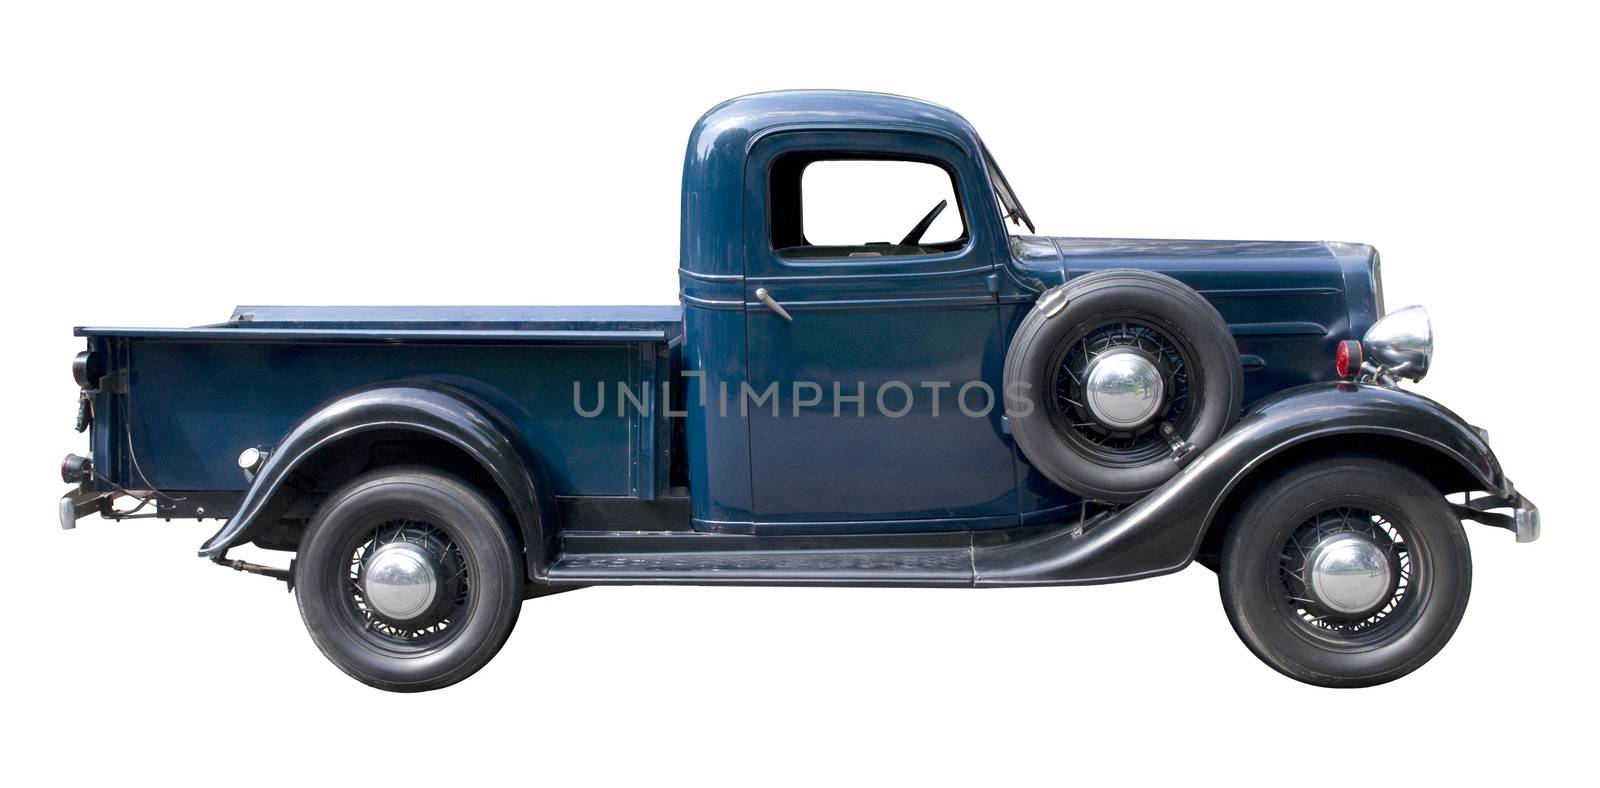 Blue vintage pickup truck from 1930s isolated against white background